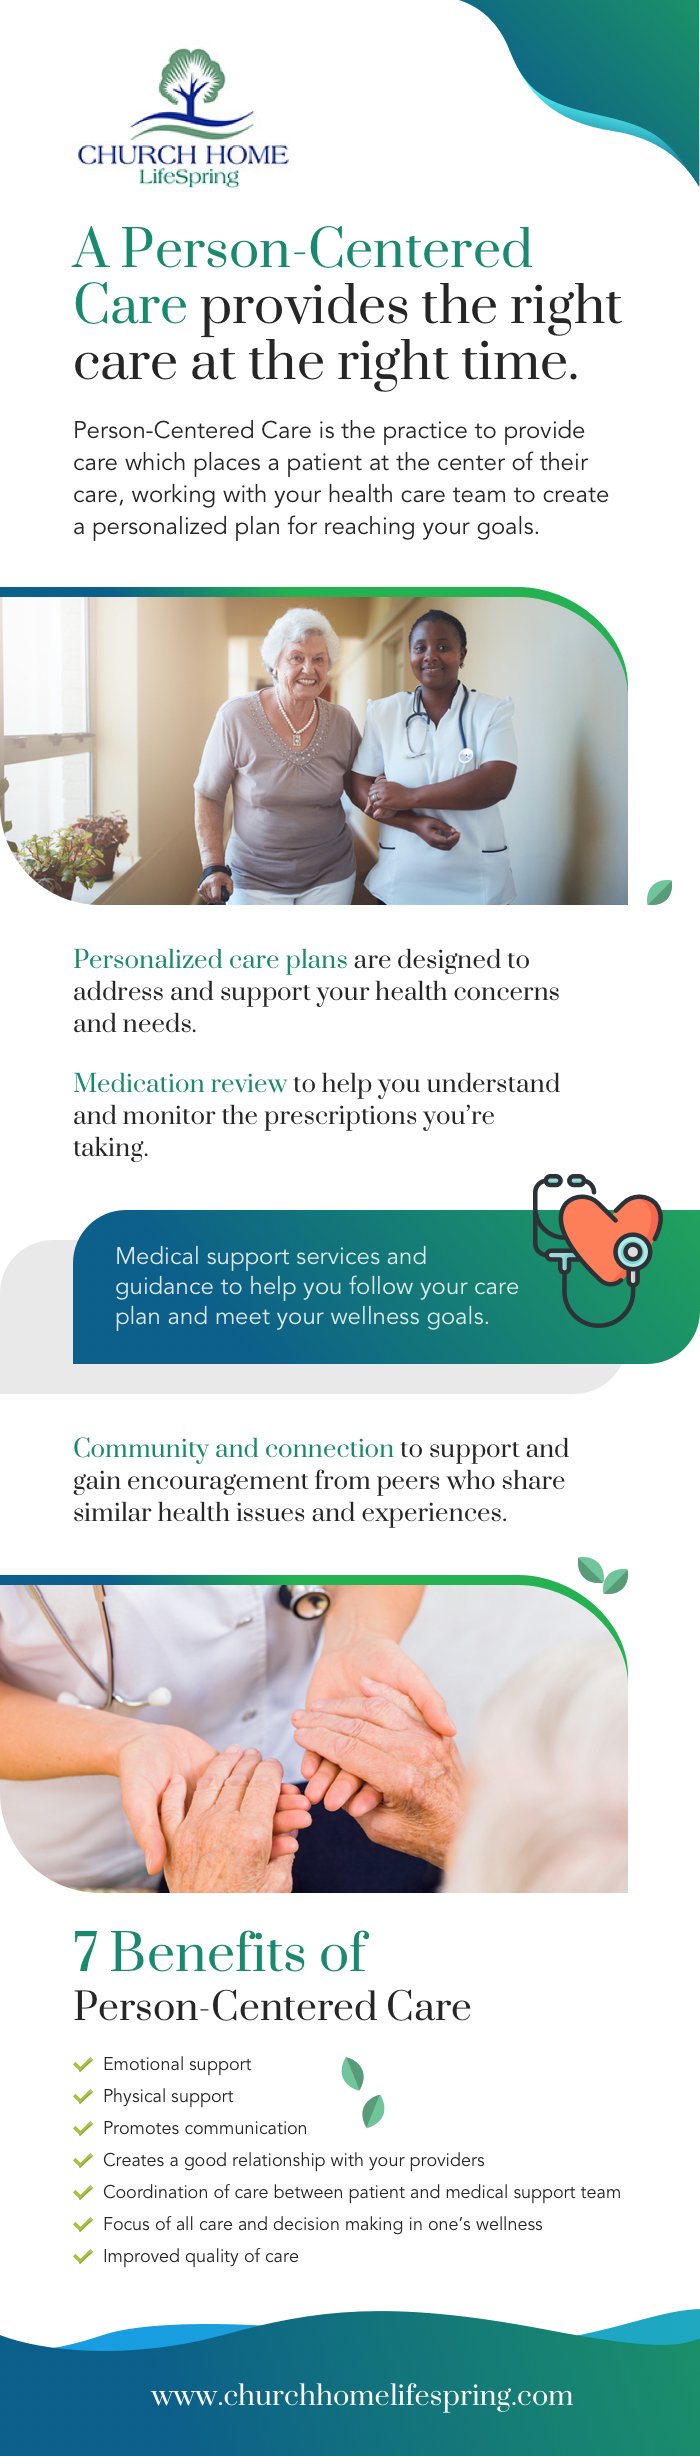 Church Home LifeSpring - Person Centered Care Infograohic_March 2020